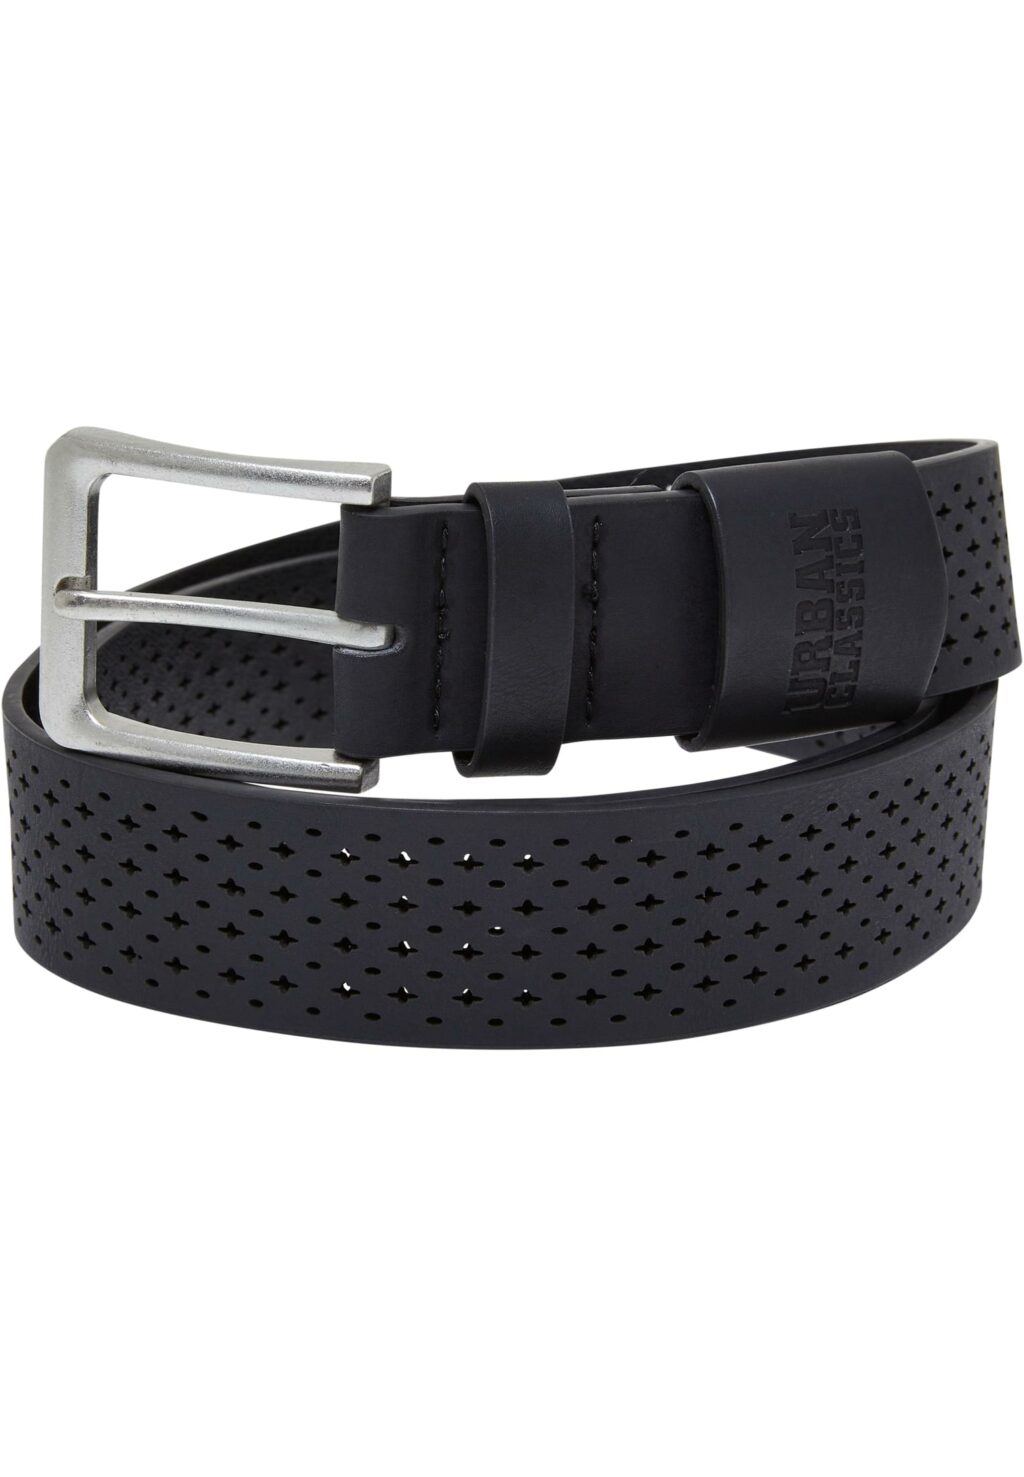 Synthentic Leather Perforated Belt black TB6495